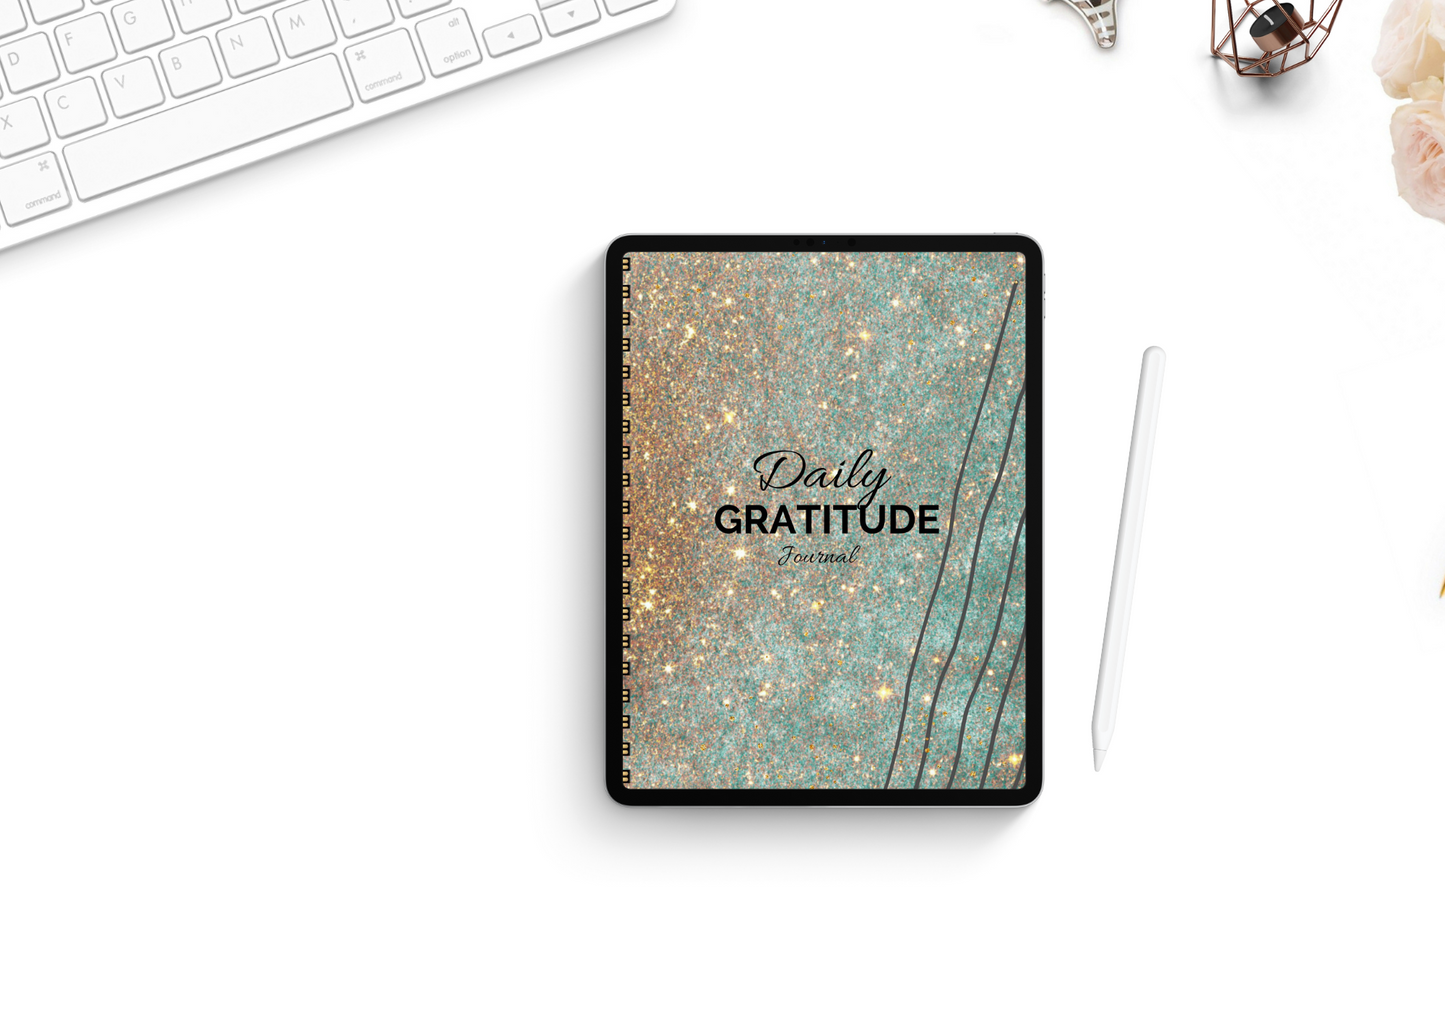 PLR Digital Daily Journal | GoodNotes Journal | iPad Journals | Digital Diary For Commercial Use